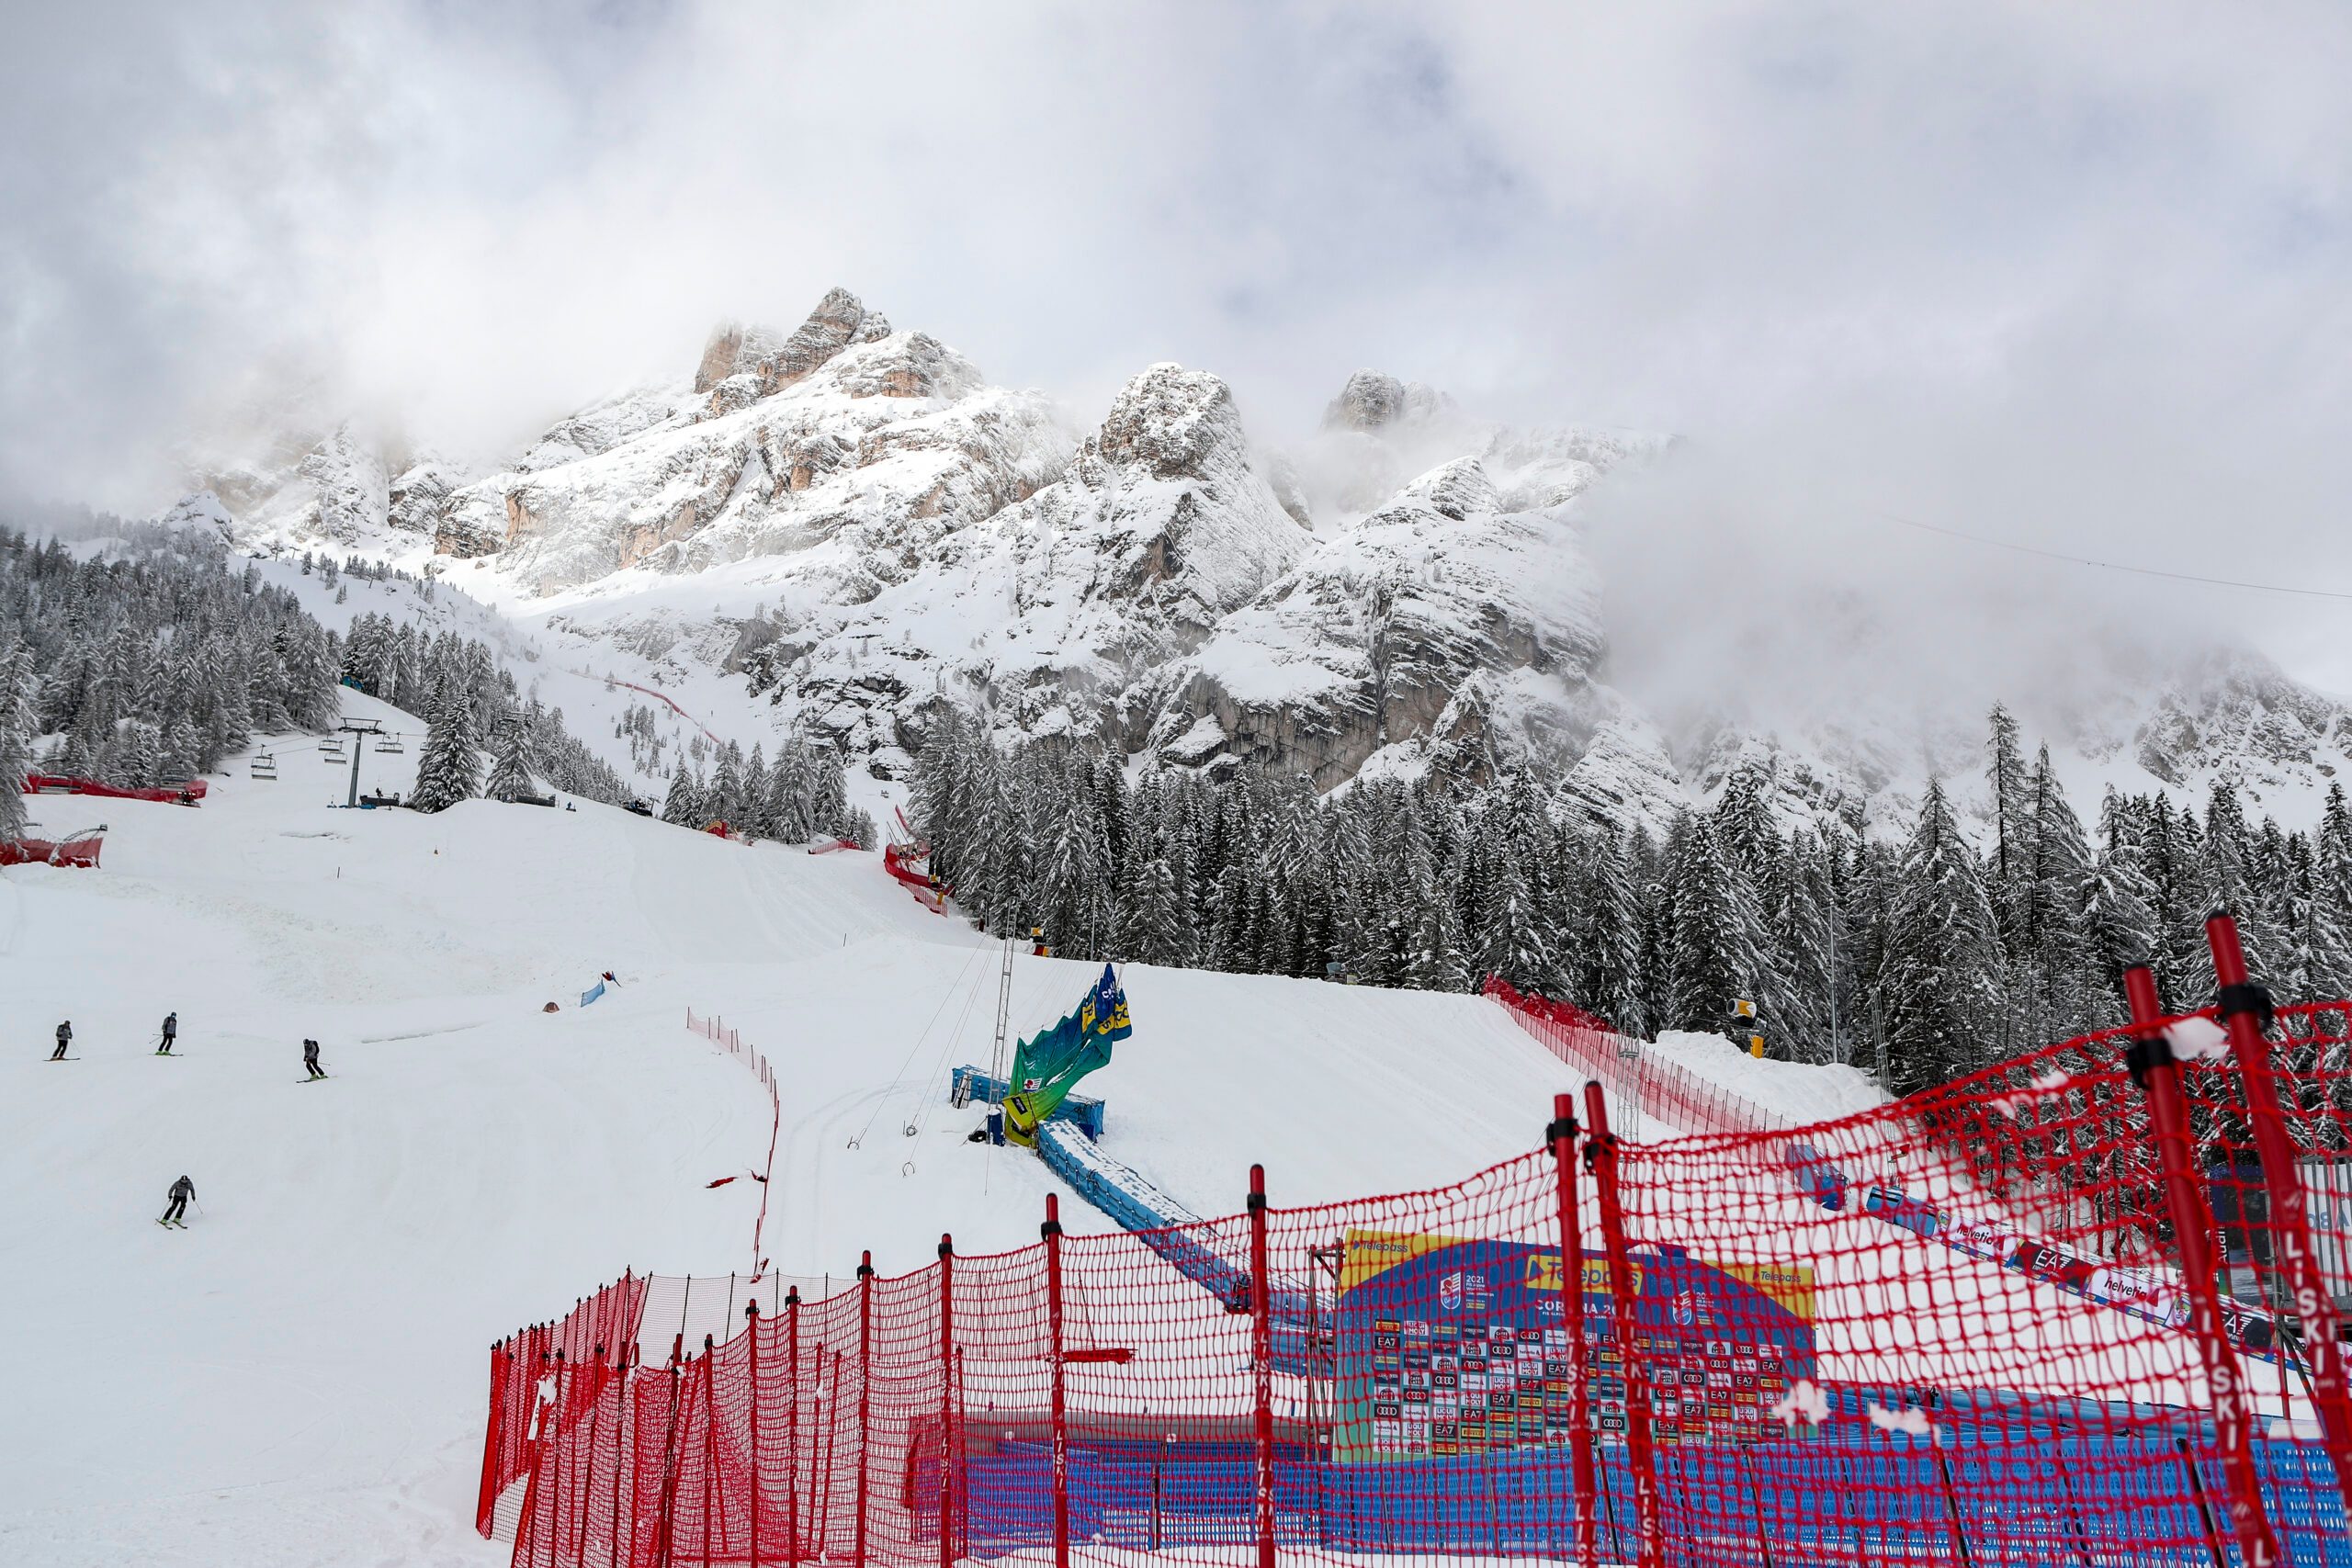 CORTINA D AMPEZZO,ITALY,08.FEB.21 - ALPINE SKIING - FIS Alpine World Ski Championships, alpine combined, slalom. Image shows an overview of the course.